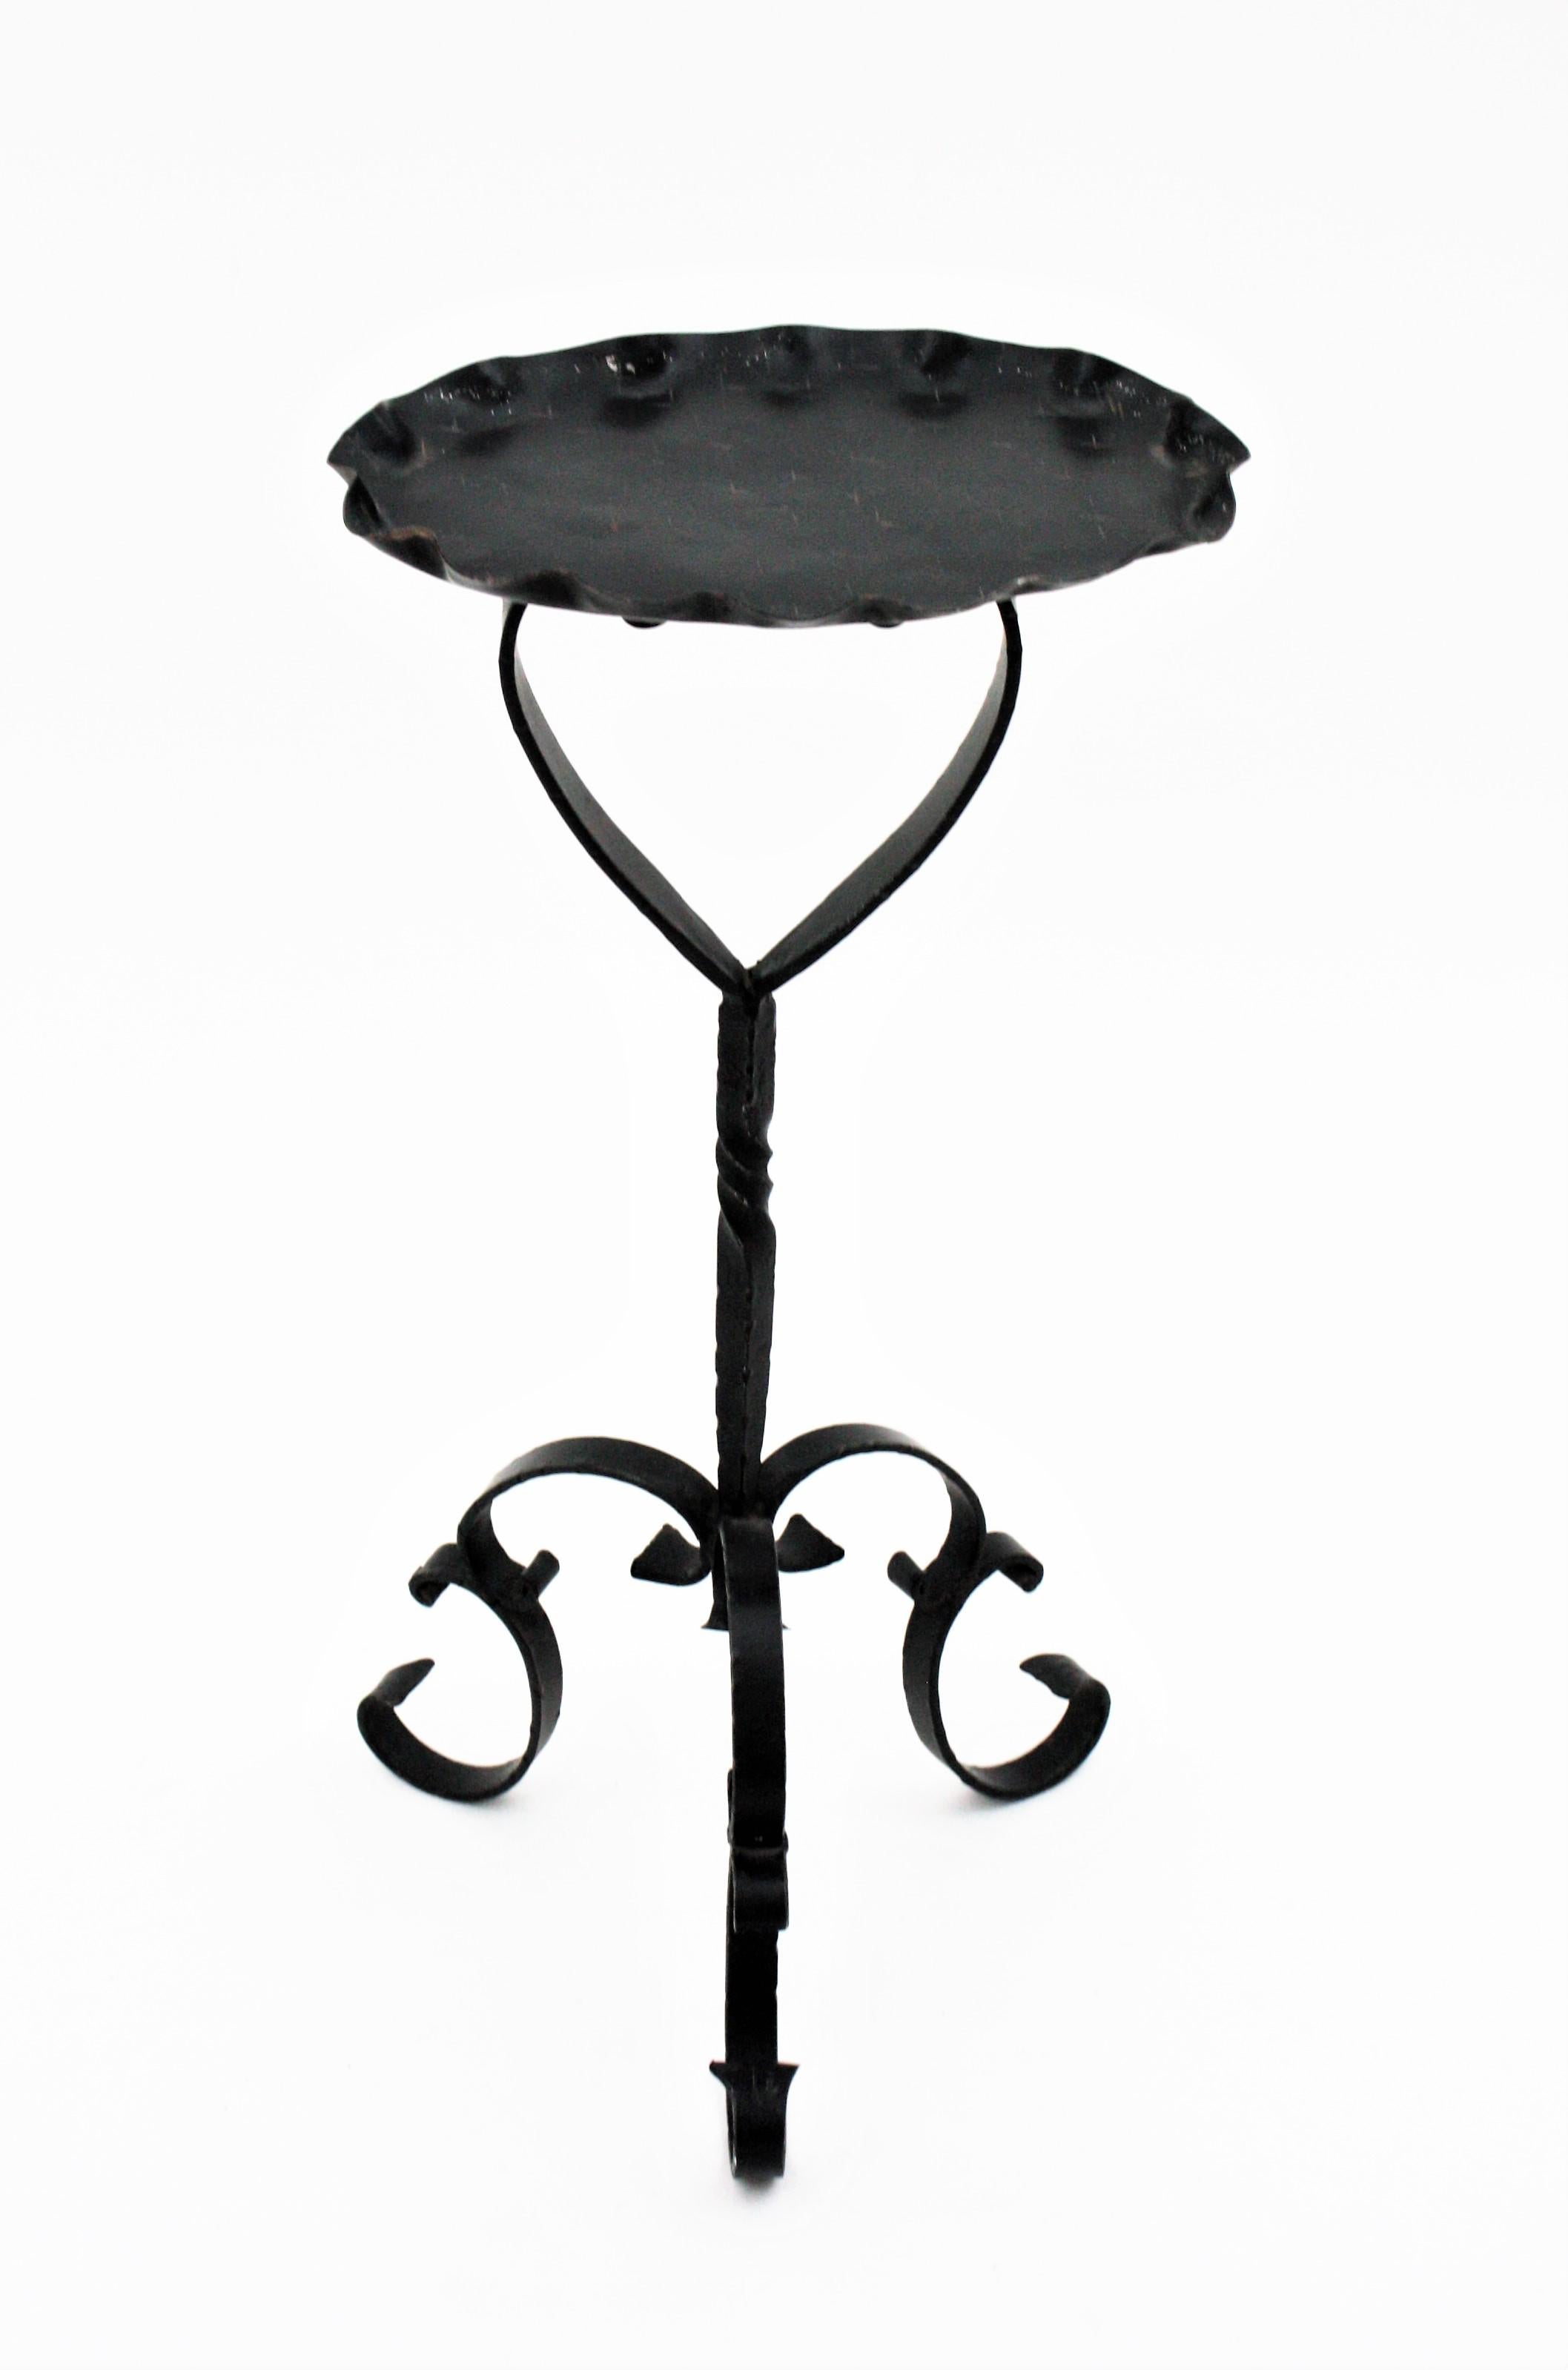 Spanish black wrough iron drinks table gueridon, end or side table. Manufactured in Spain, 1950s-1960s.
This pedestal table has an oval wavy edged top heavily decored by the hammer work. It stands on a tripod base with twisting details at the stem